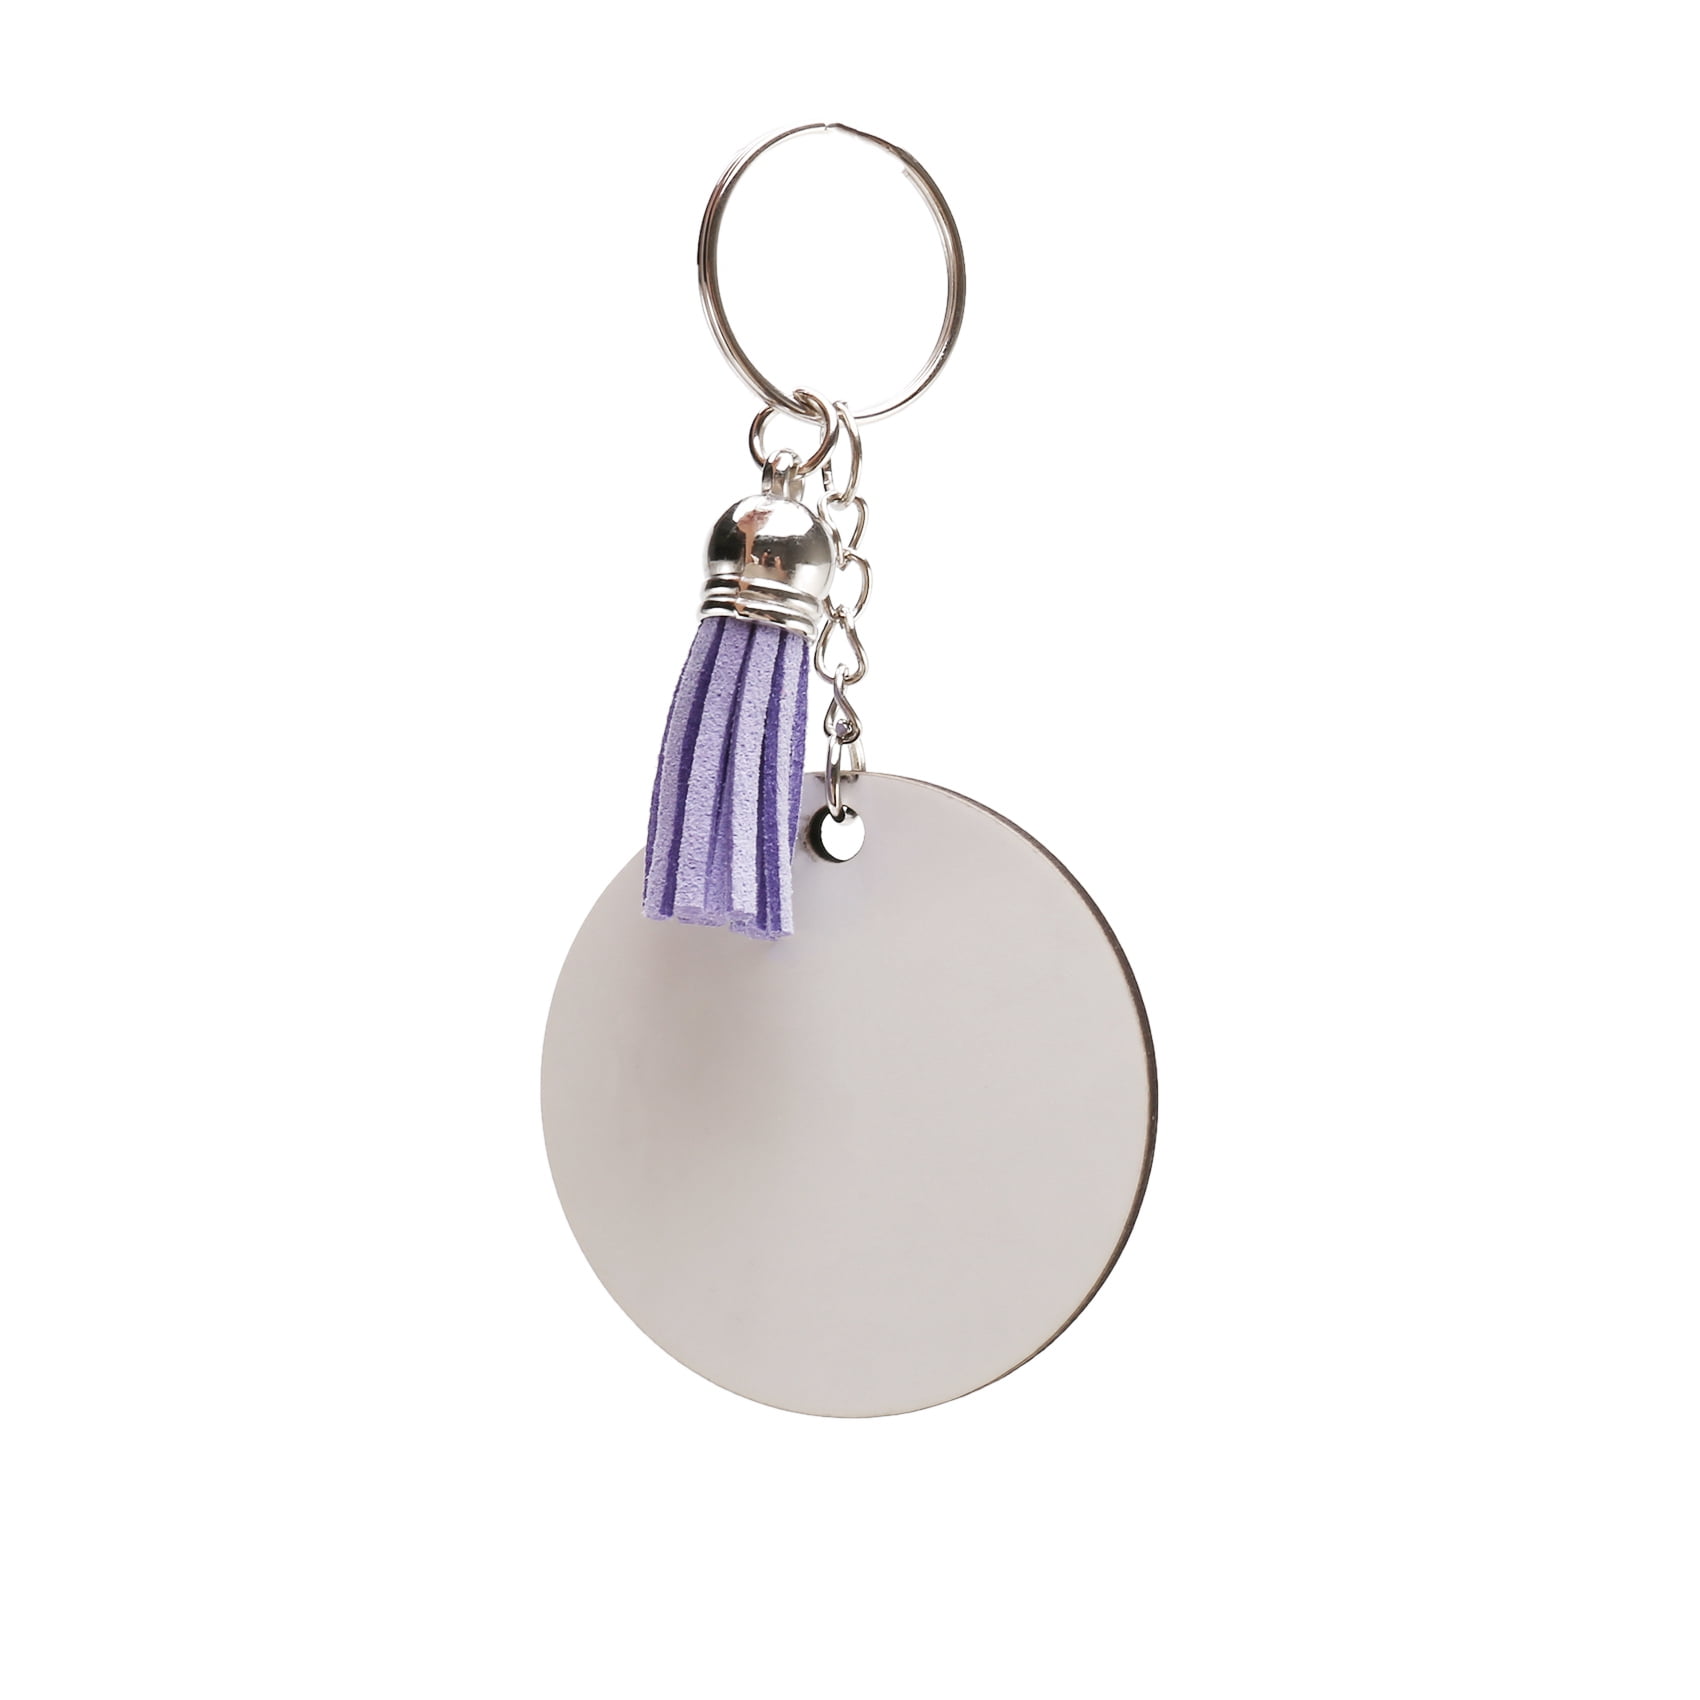 Sublimation Blank Keychains With Colorful Tassels For Heat Transfer DIY  Bookmarks From Monicanny, $27.7